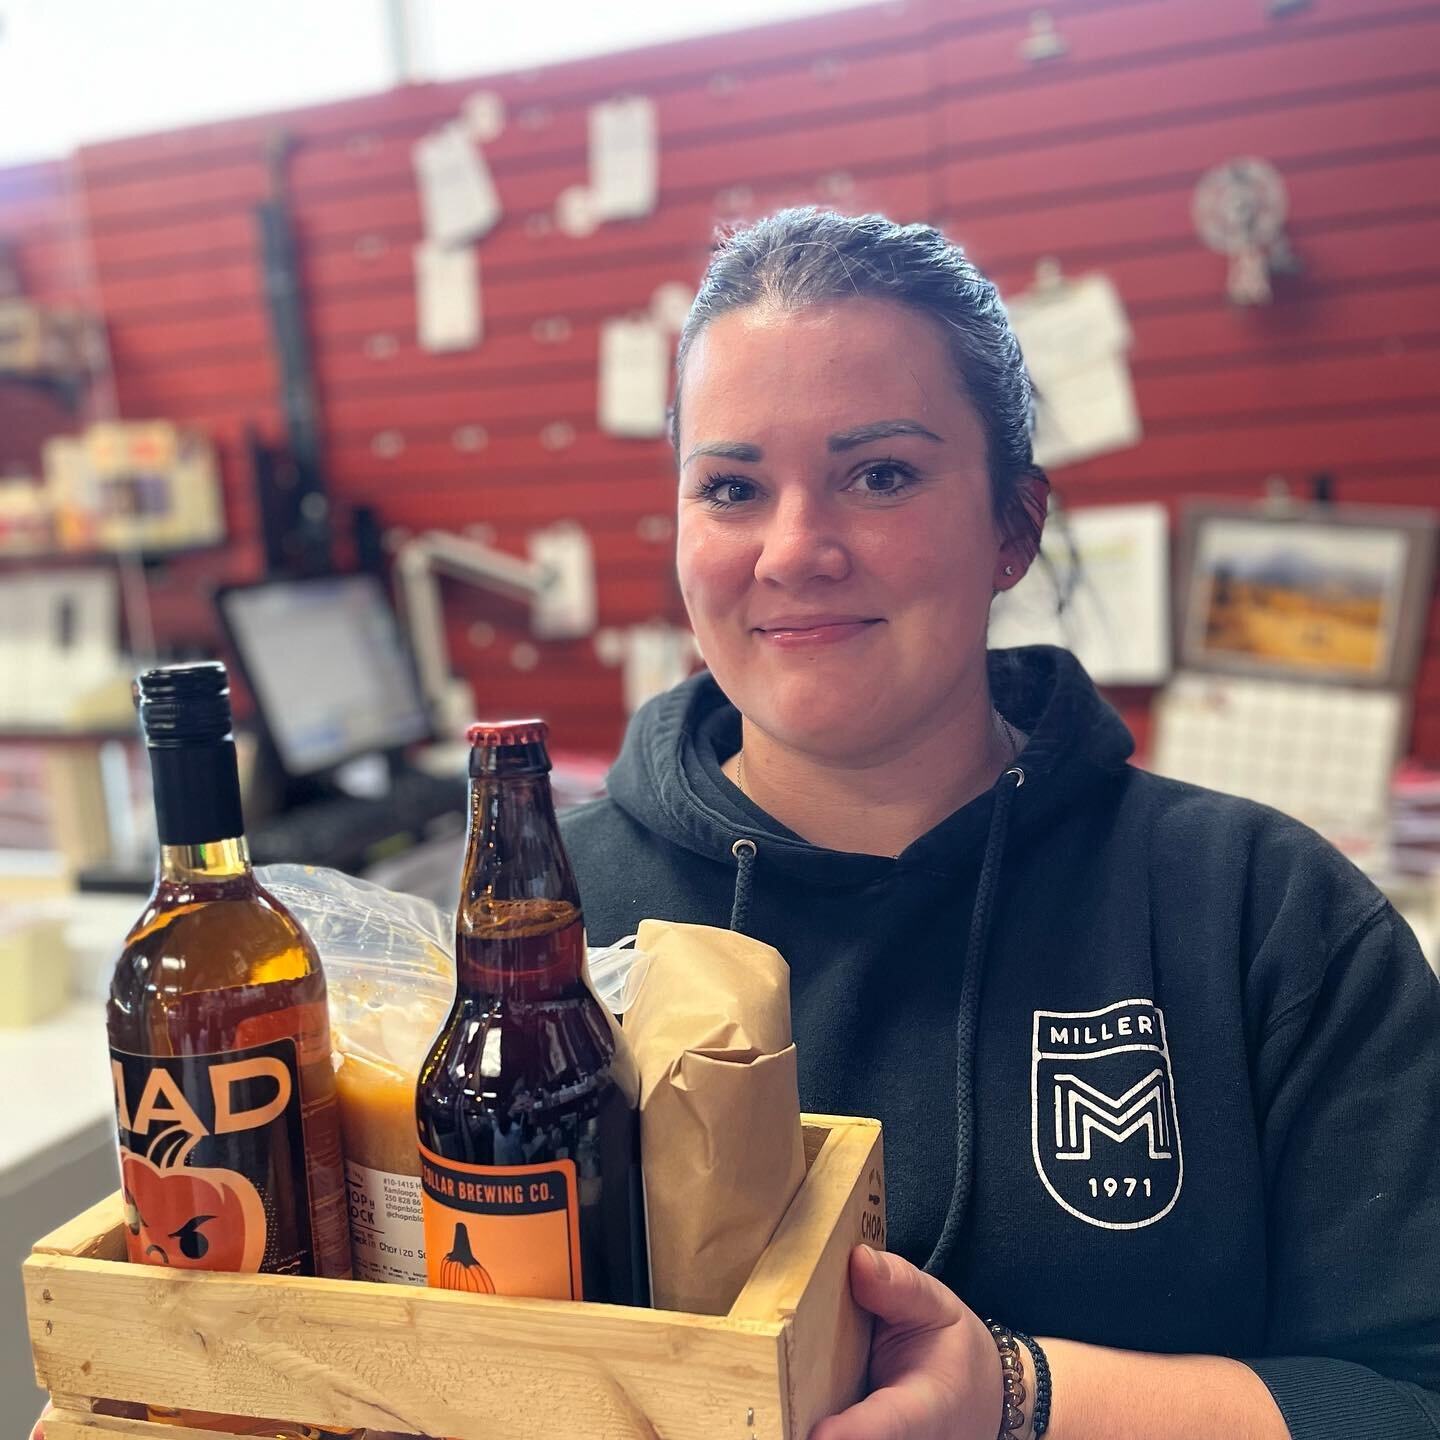 Our lovely Stephanie was voted favorite pumpkin for our carving contest! 
She&rsquo;s taking home a pumpkin basket complete with our pumpkin chorizo sausage, our housemade pumpkin soup, and some pumpkin bevies 🍺 🎃 

#pumpkincarvingcontest #pumpkinc